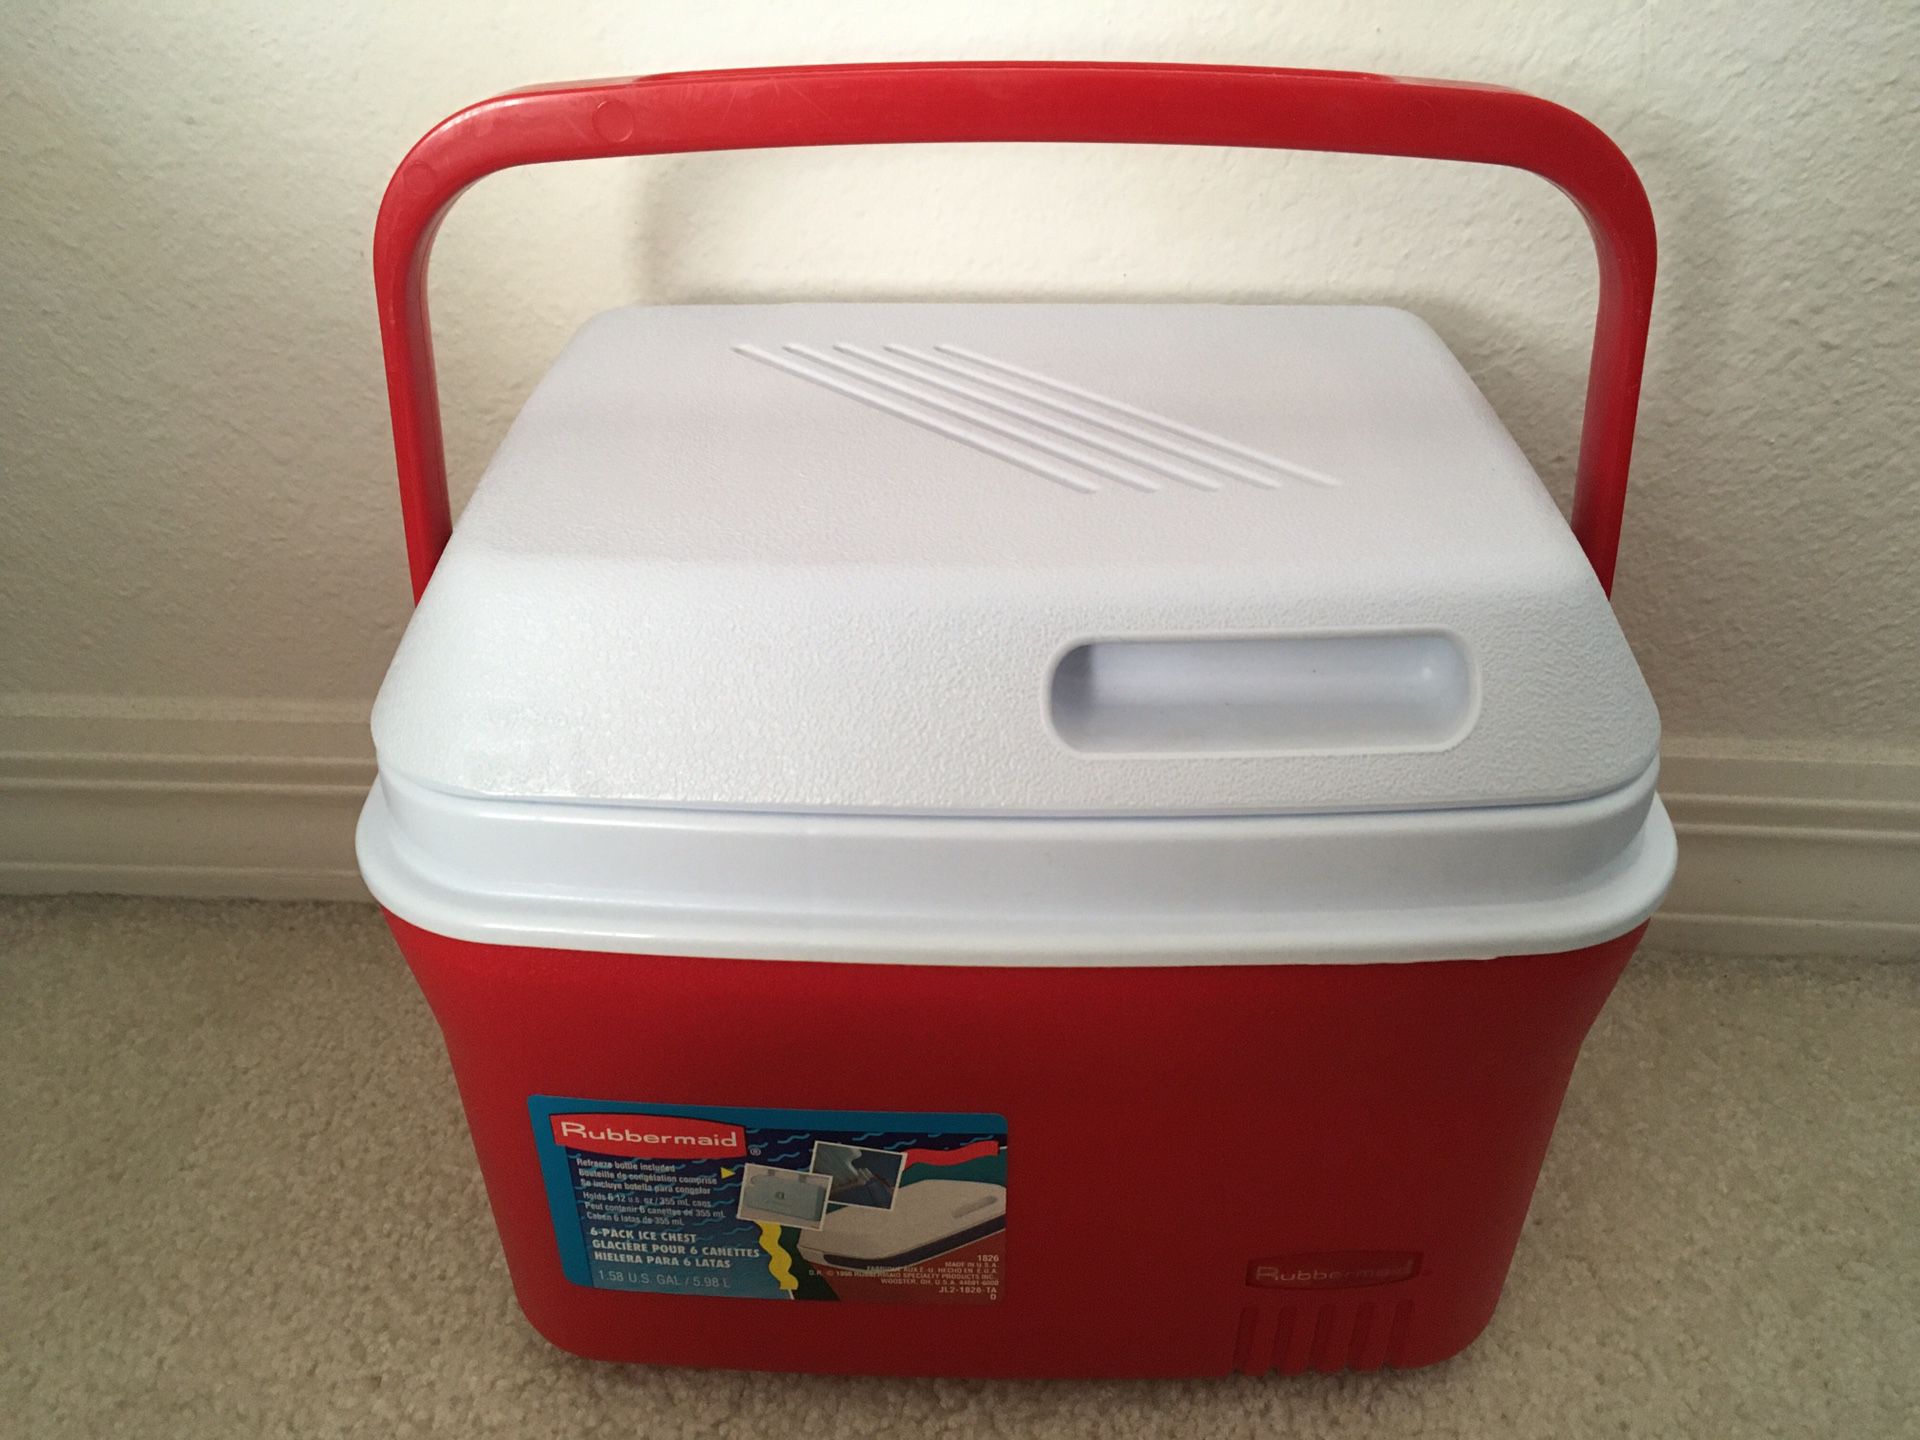 Rubbermaid Personal Vintage Lunch Box Teal and White Hard Plastic